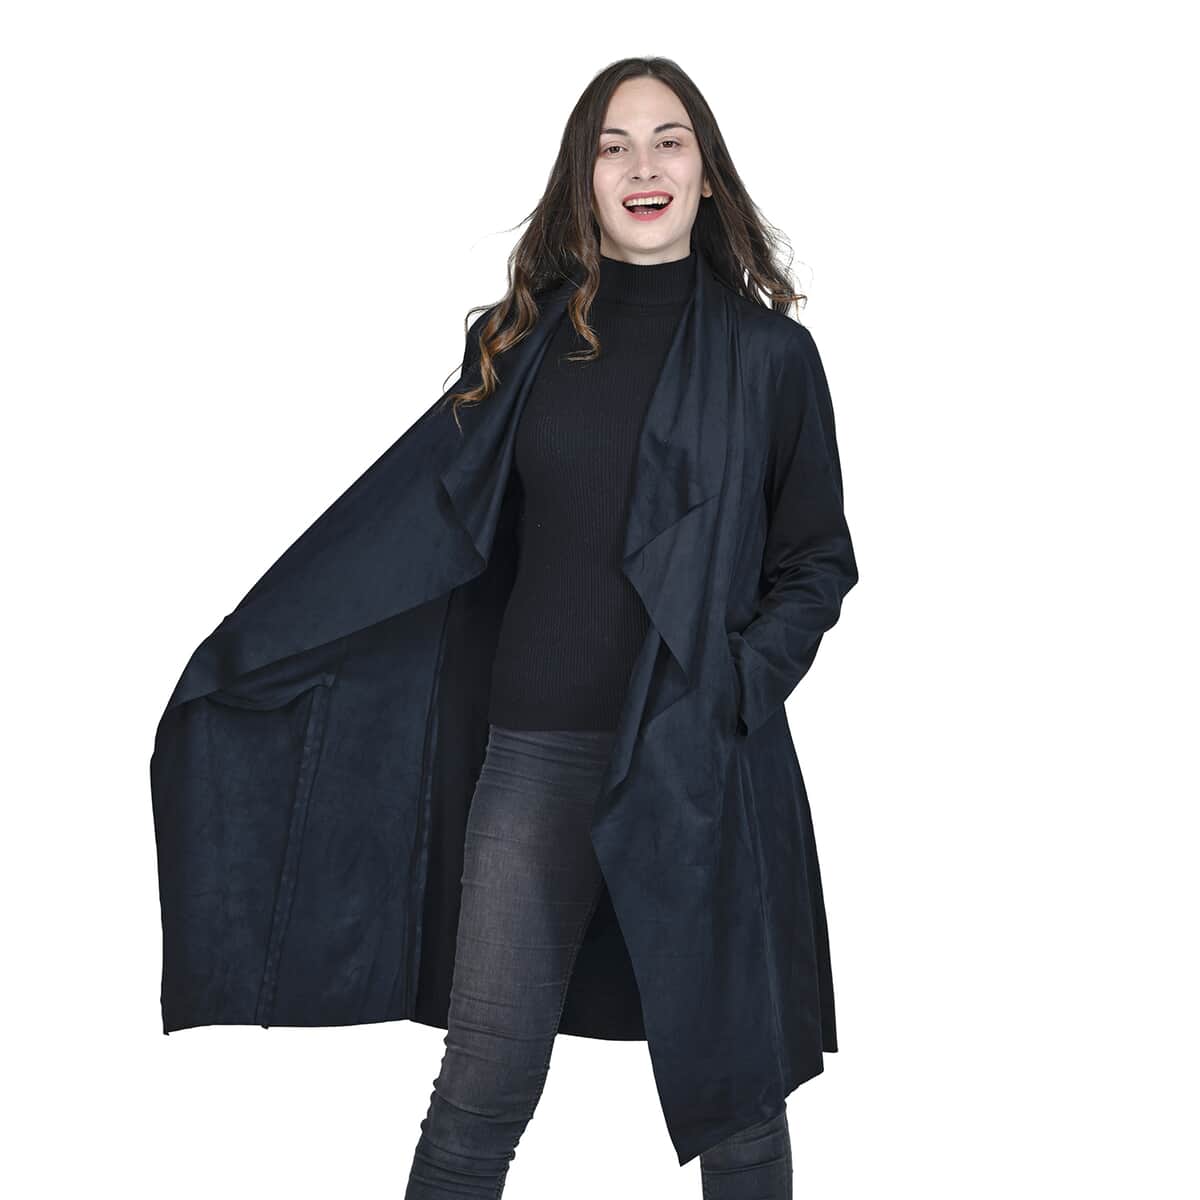 Passage Slate Black Faux Suede Long Waterfall Open Front Jacket For Ladies - S , Jacket for Women , Long Coat Jacket for Women , Womens Coats image number 3